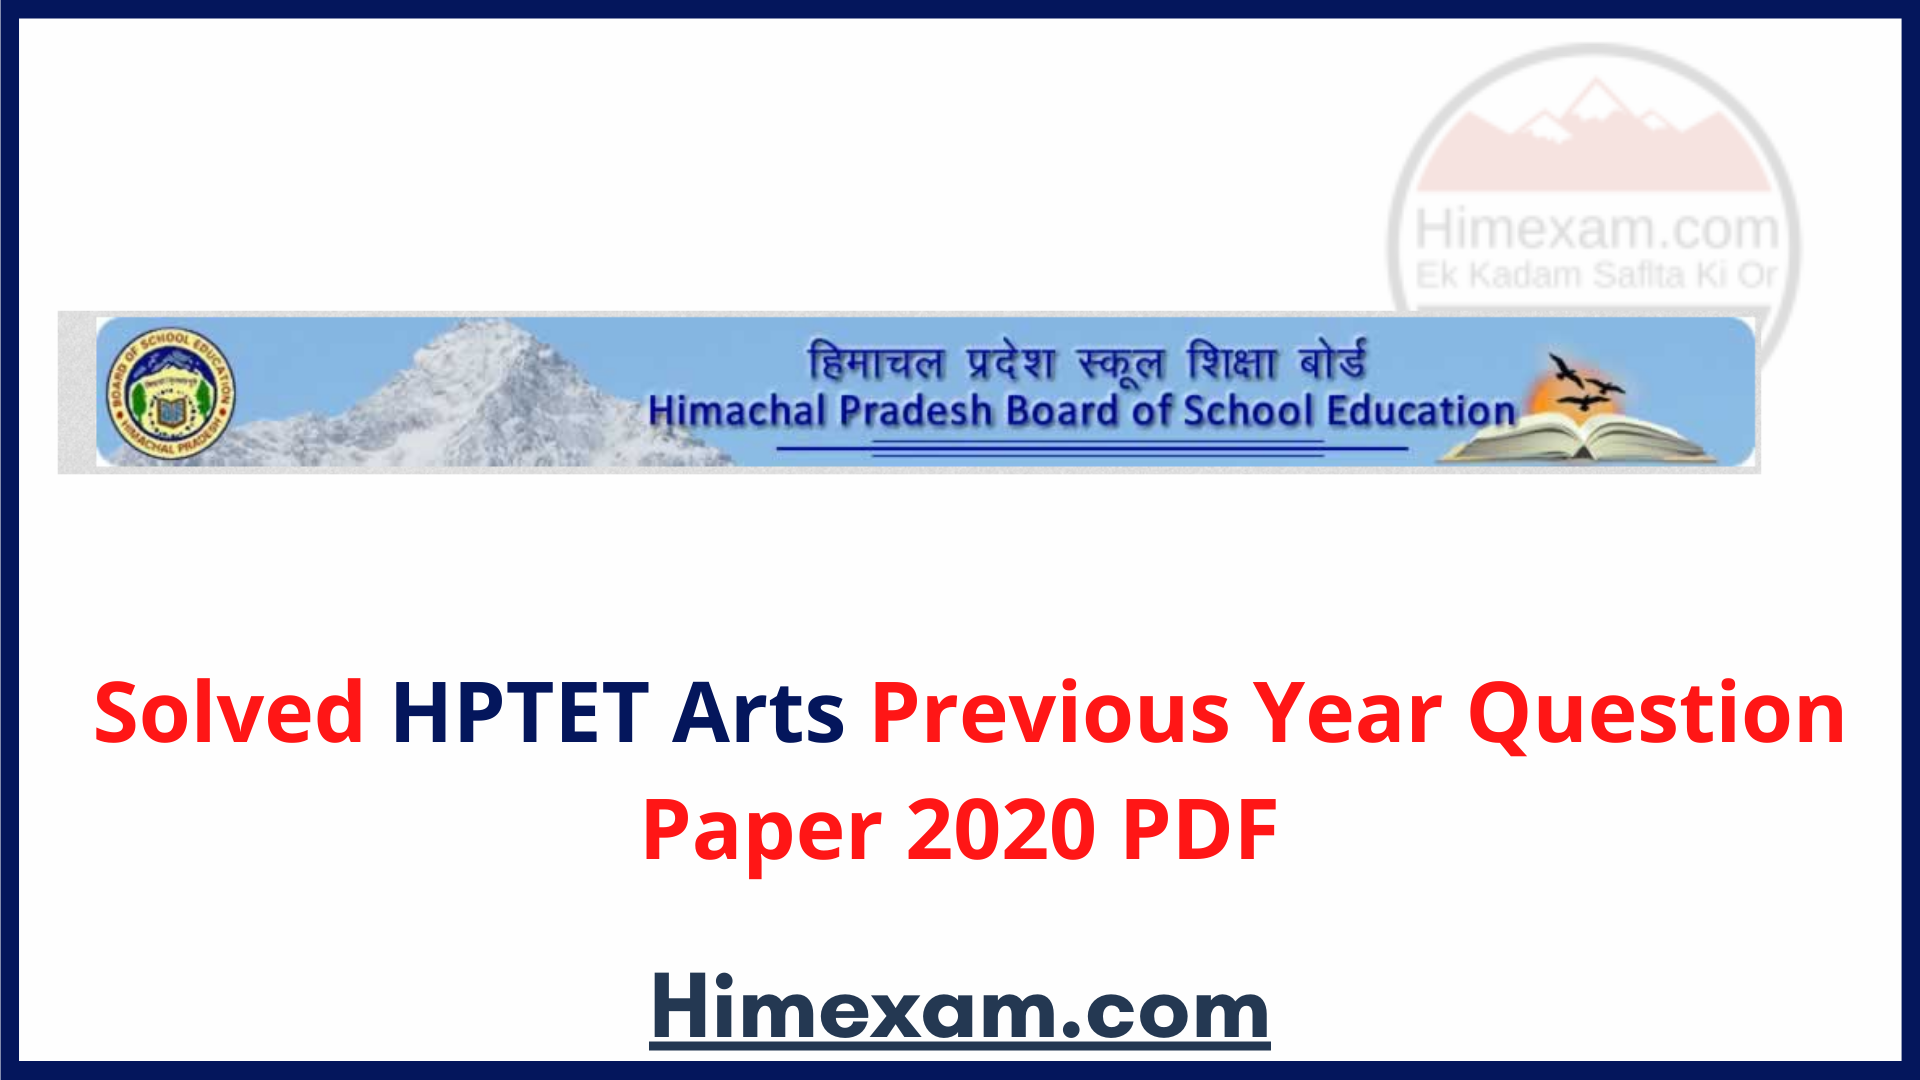 Solved HPTET Arts Previous Year Question Paper 2020 PDF